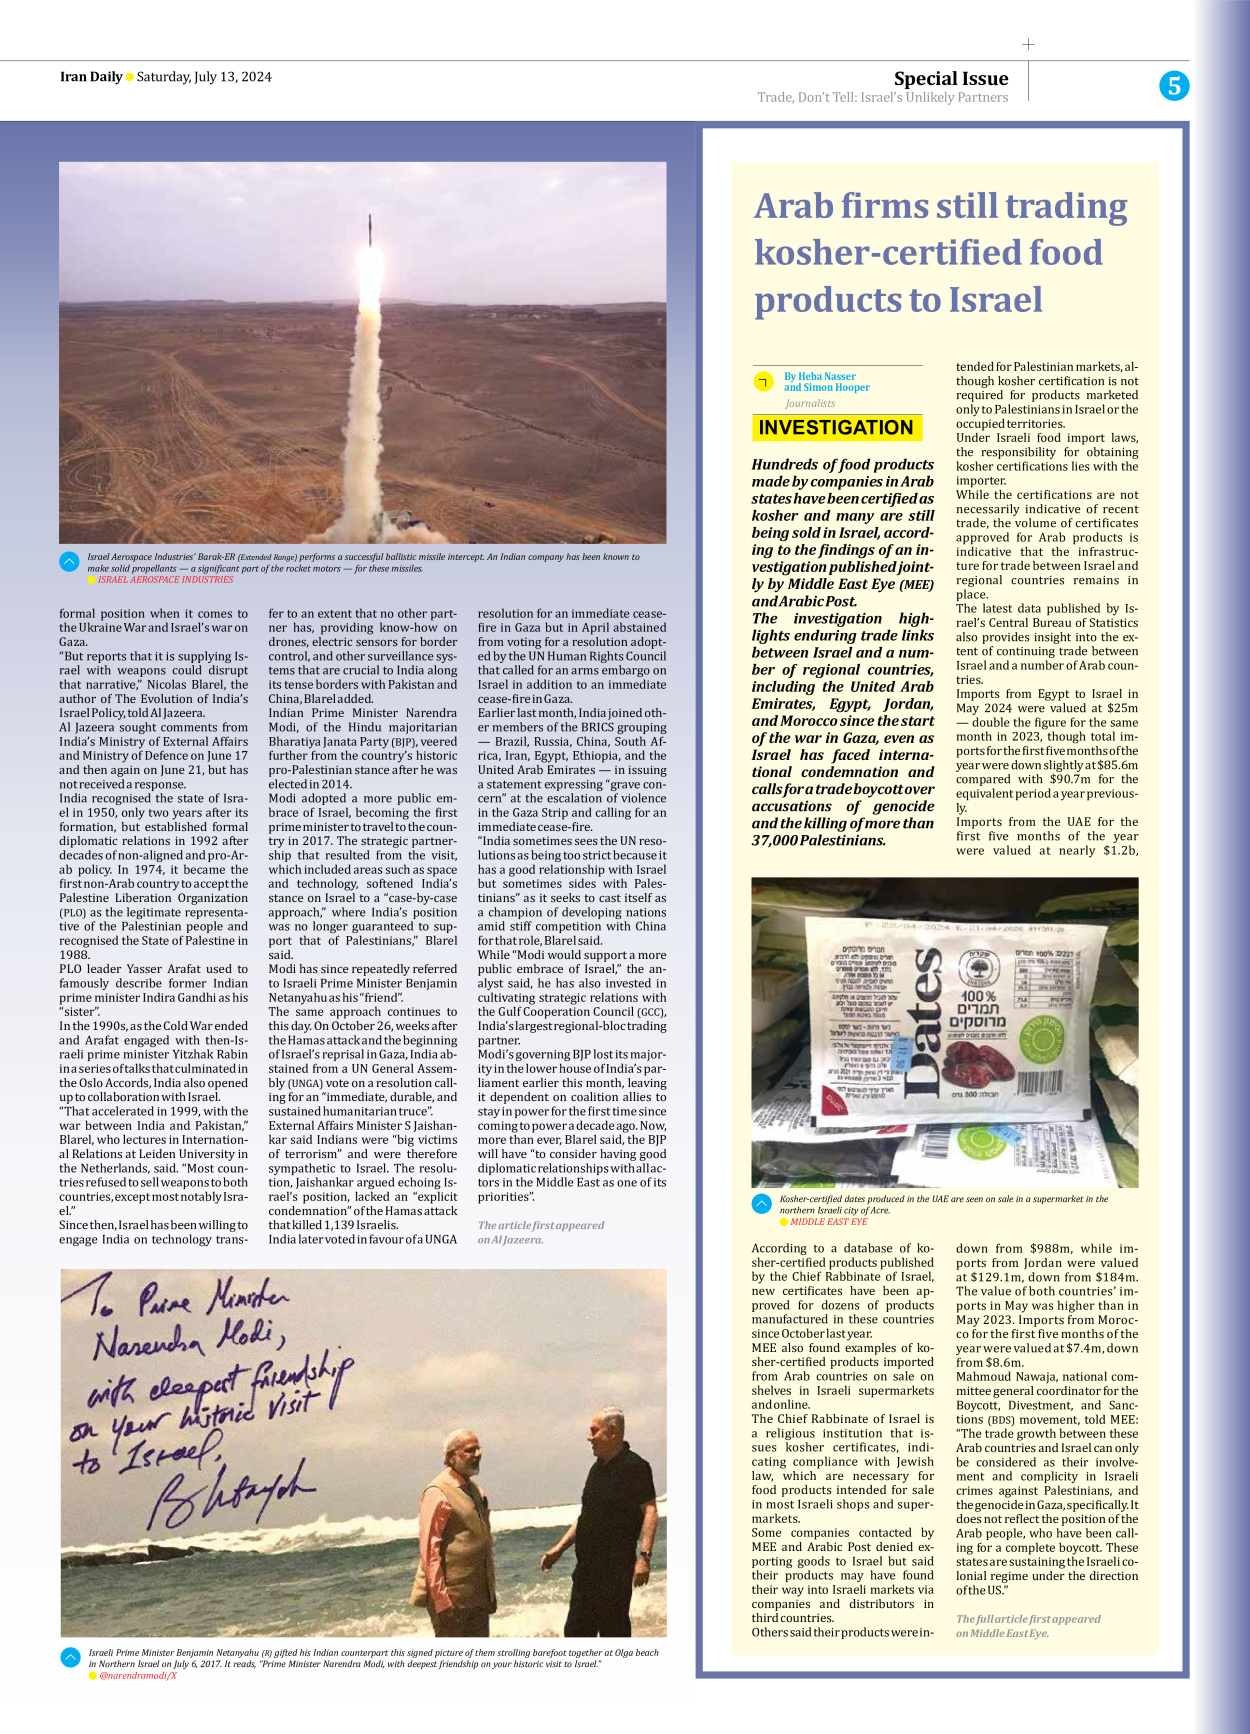 Iran Daily - Number Seven Thousand Six Hundred and Three - 13 July 2024 - Page 5